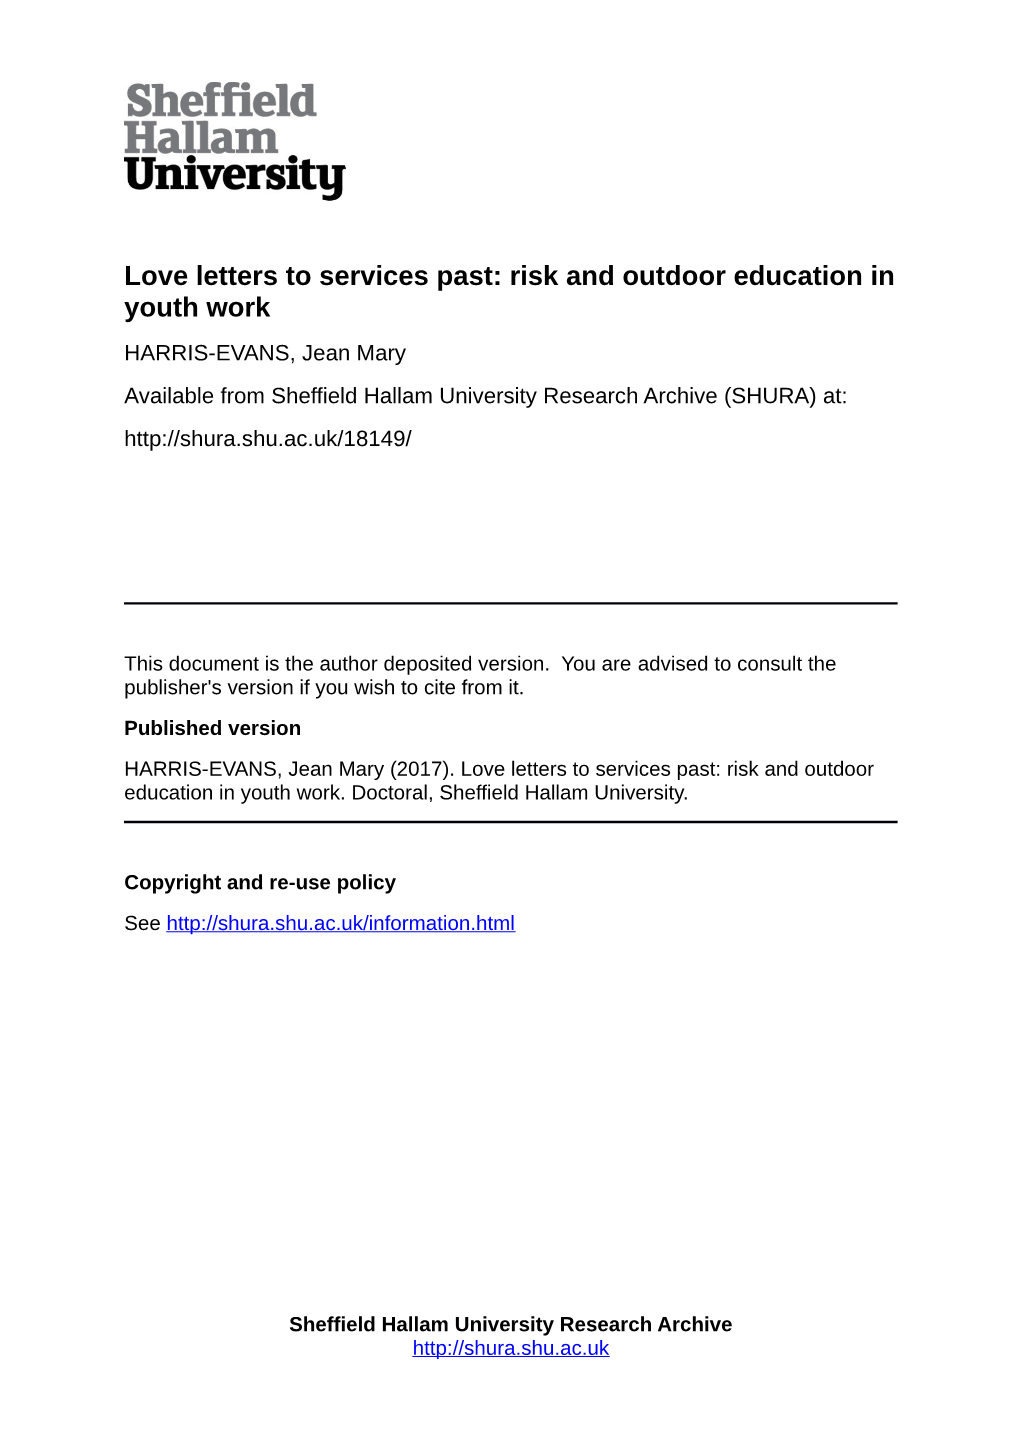 Love Letters to Services Past: Risk and Outdoor Education in Youth Work